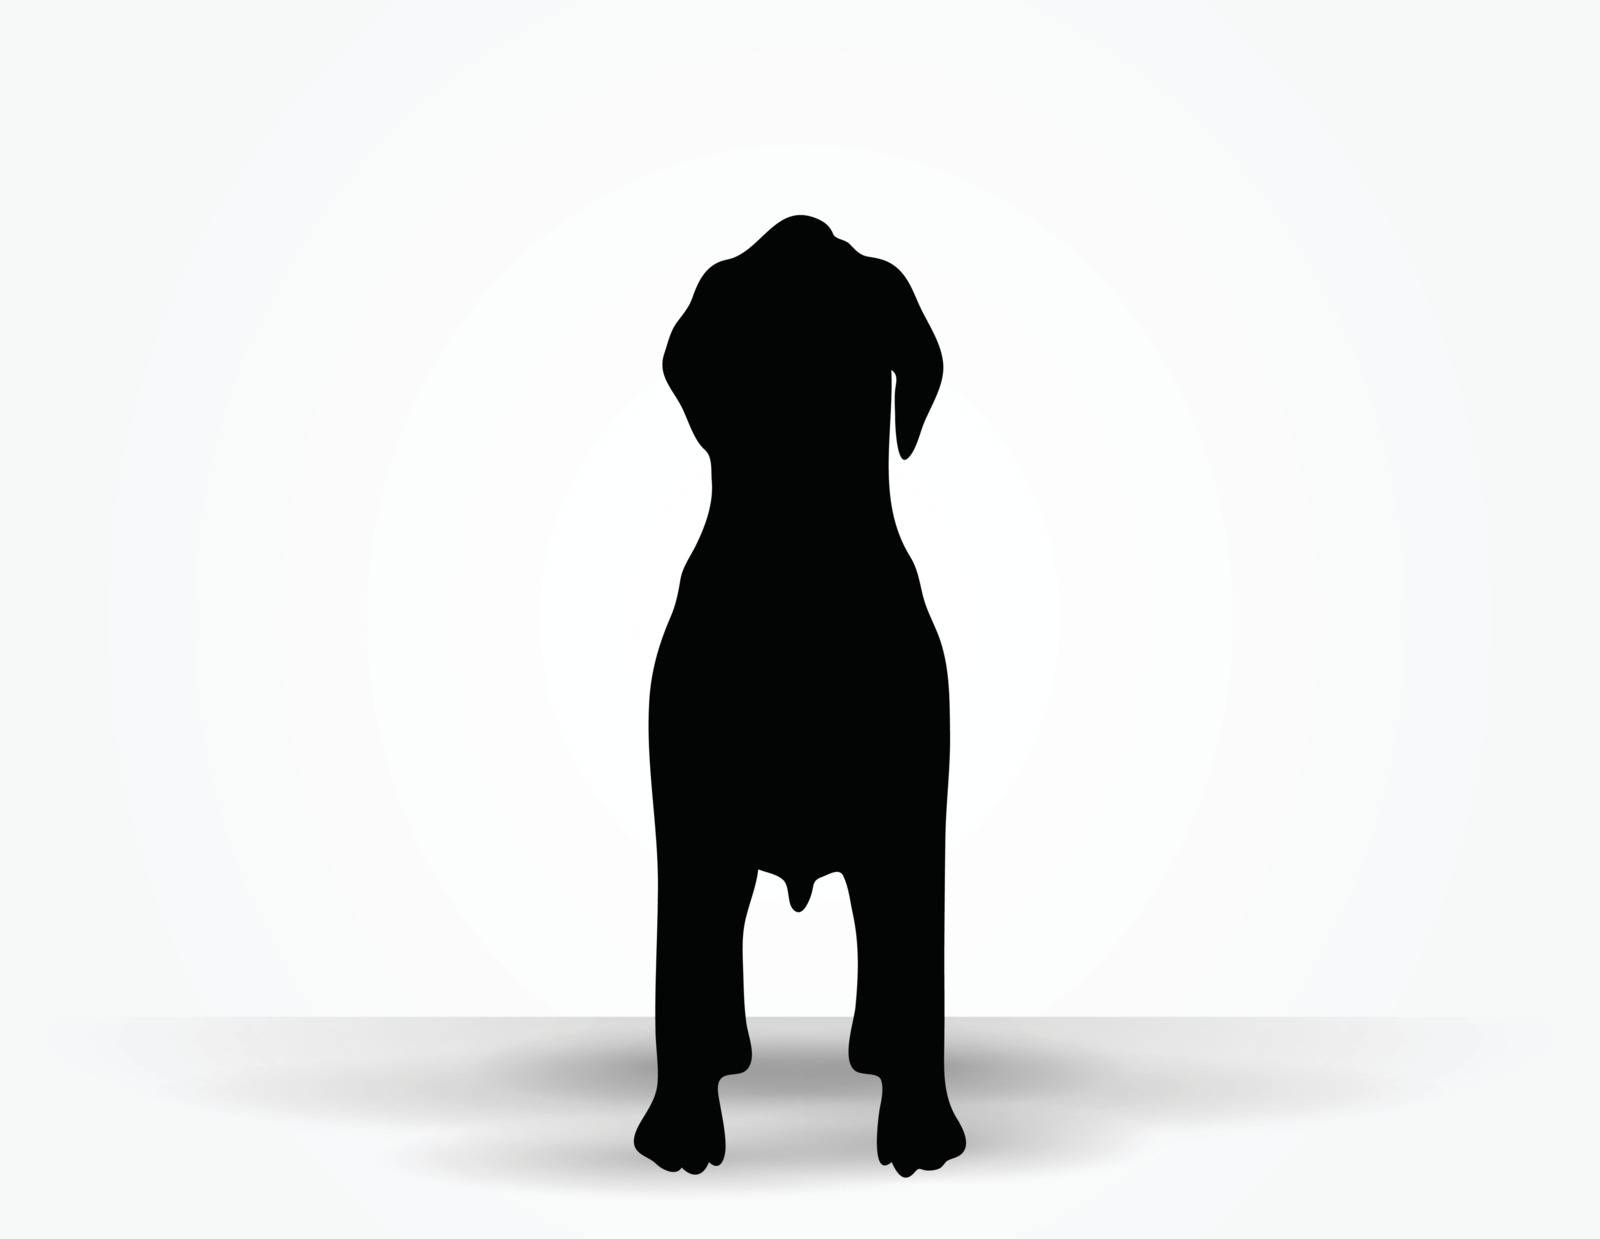 Vector Image - dog silhouette in default pose isolated on white background
